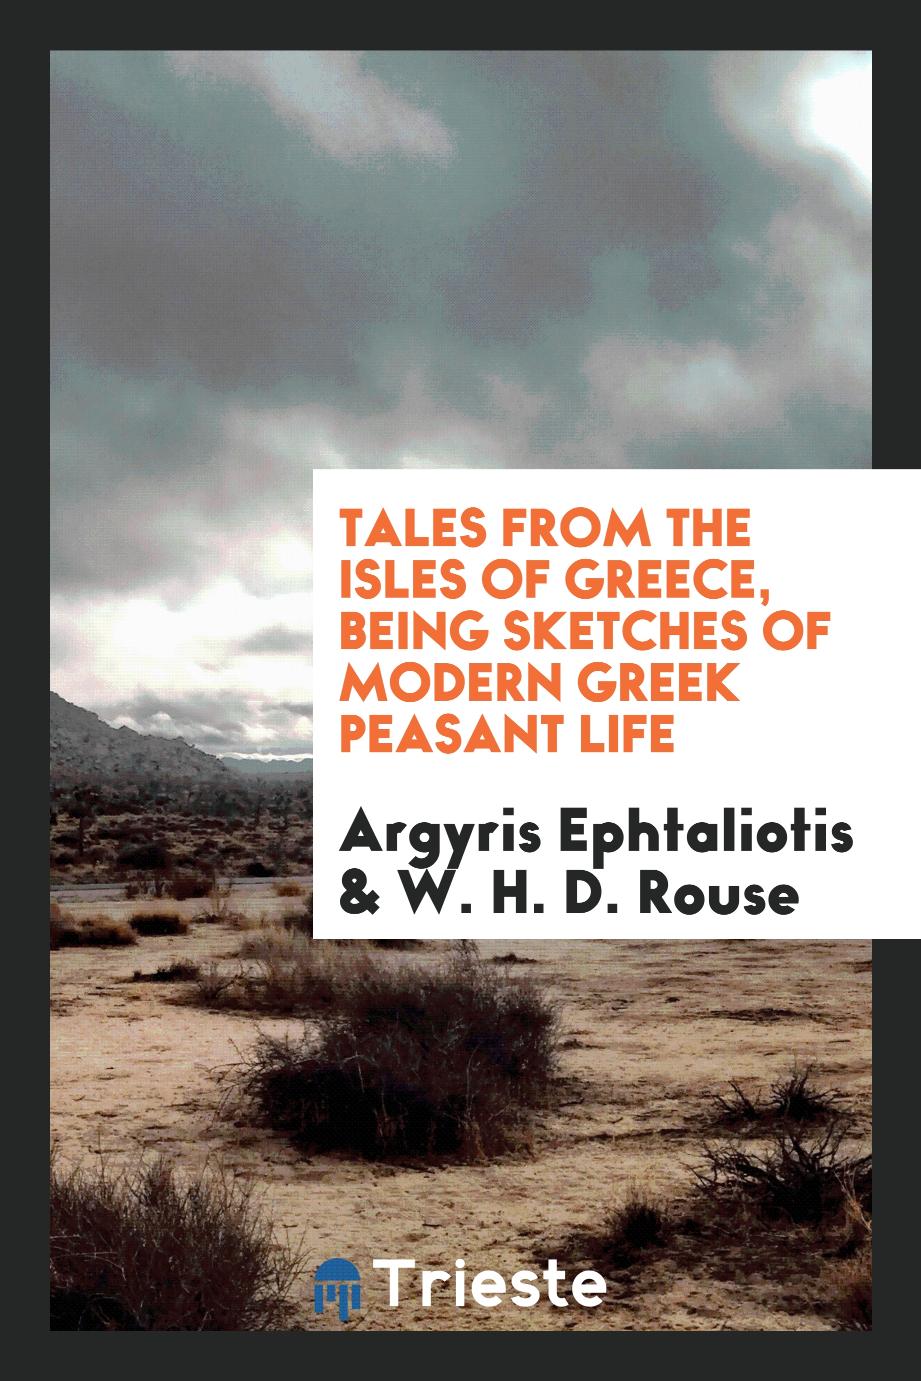 Tales from the isles of Greece, being sketches of modern Greek peasant life